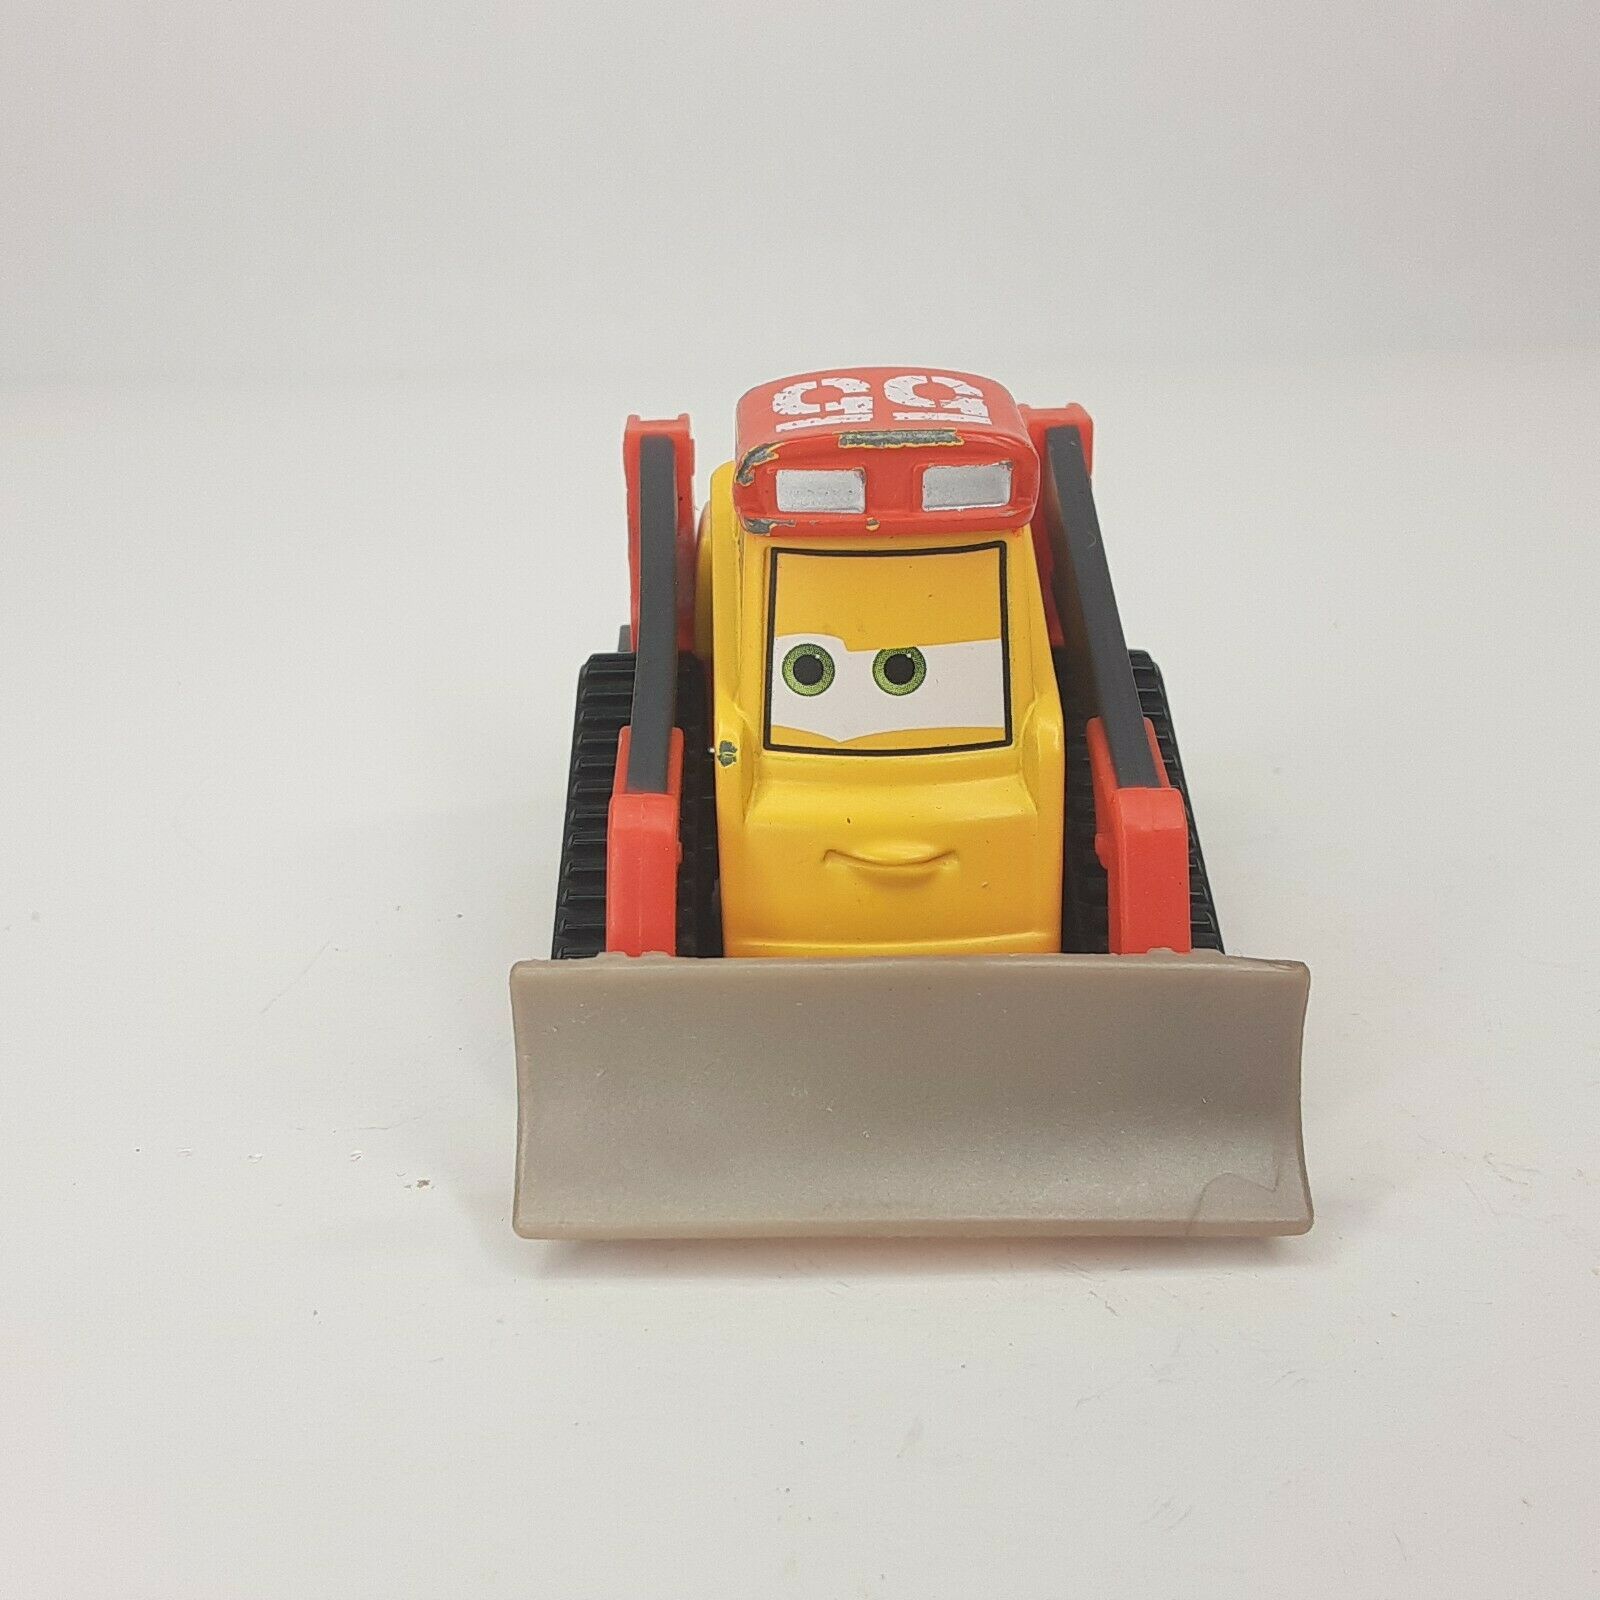 Primary image for Disney Planes Fire and Rescue Avalanche Die-Cast Vehicle (2014) Mattel Toy Car